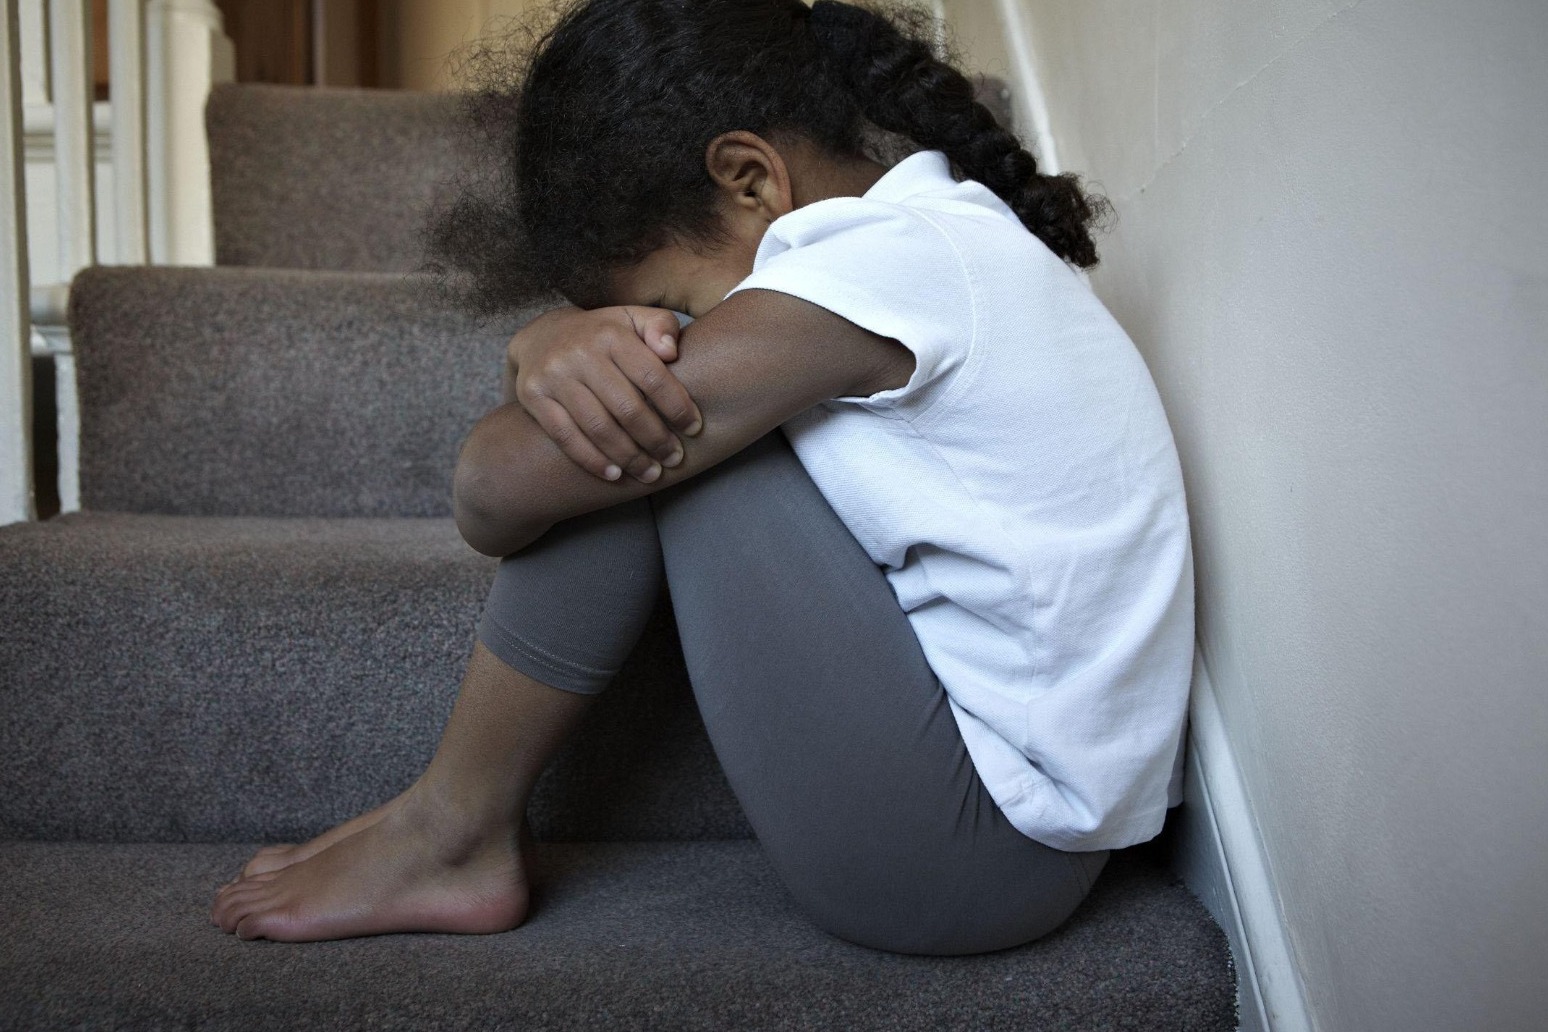 Children ‘at greater risk of domestic abuse during World Cup’ 